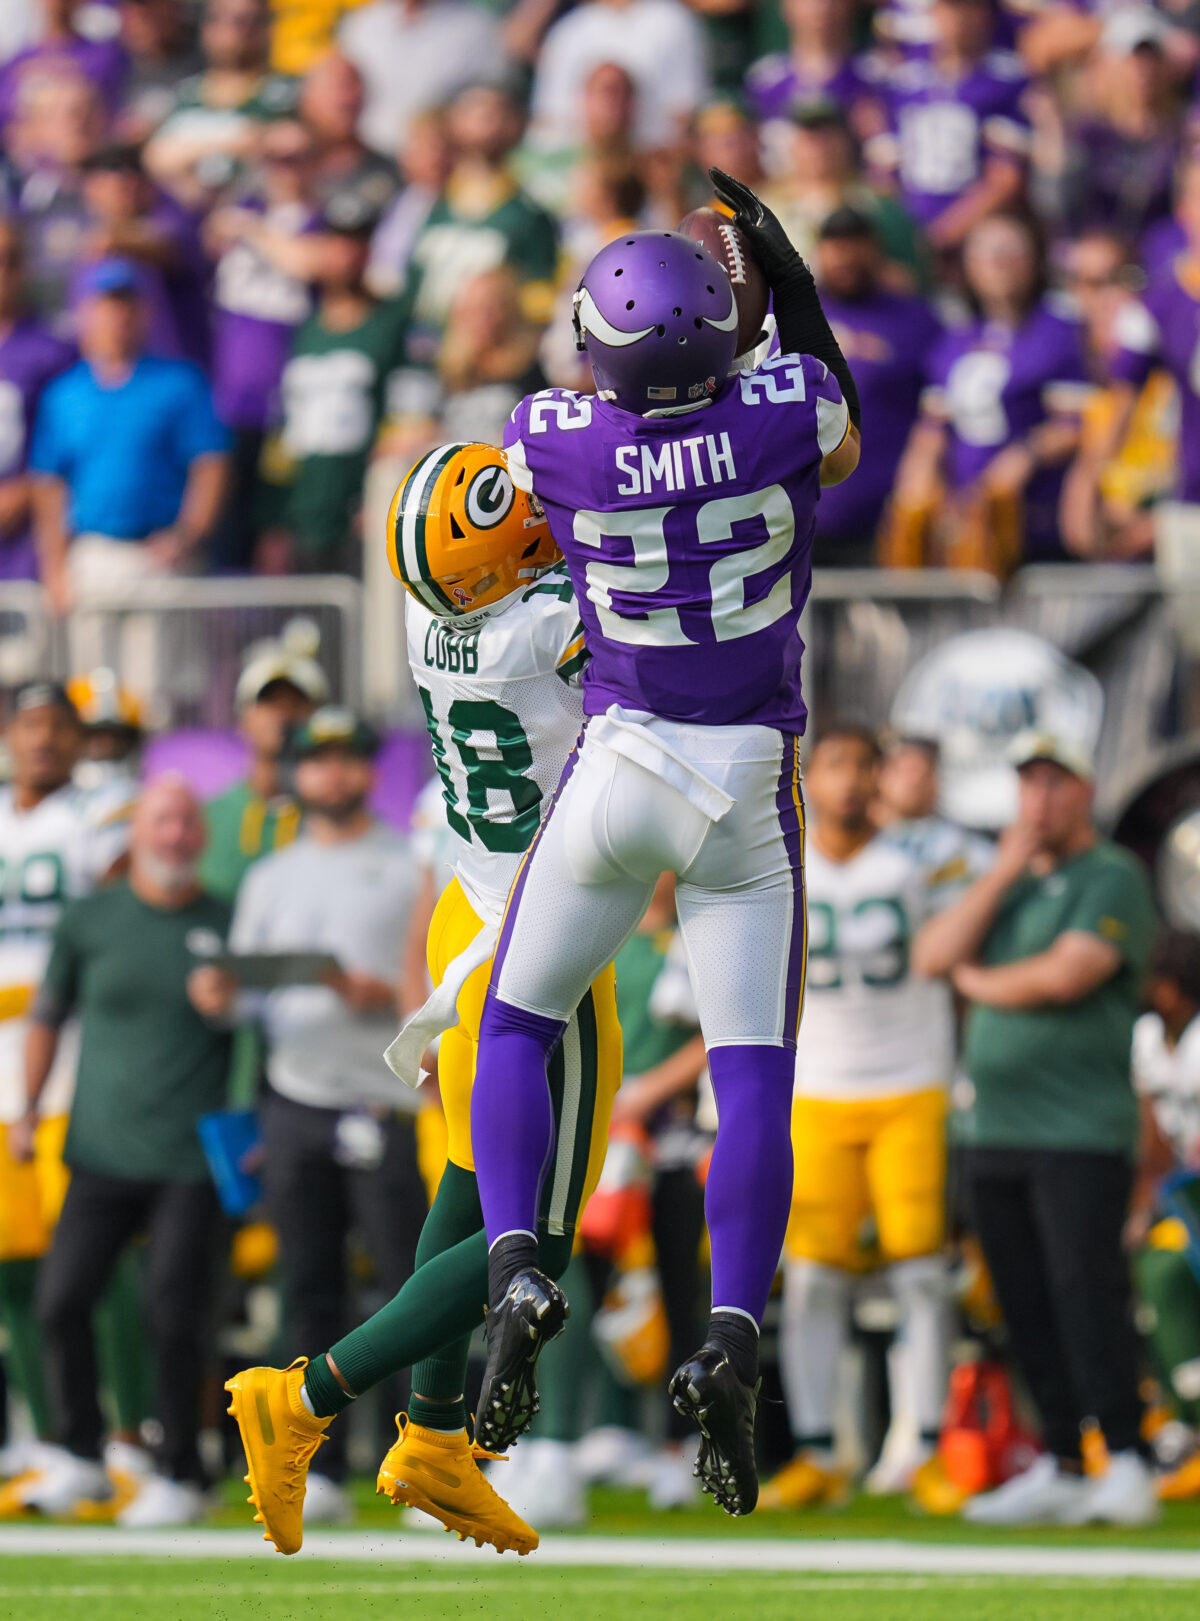 5 takeaways from the Vikings 23-7 win over the Packers